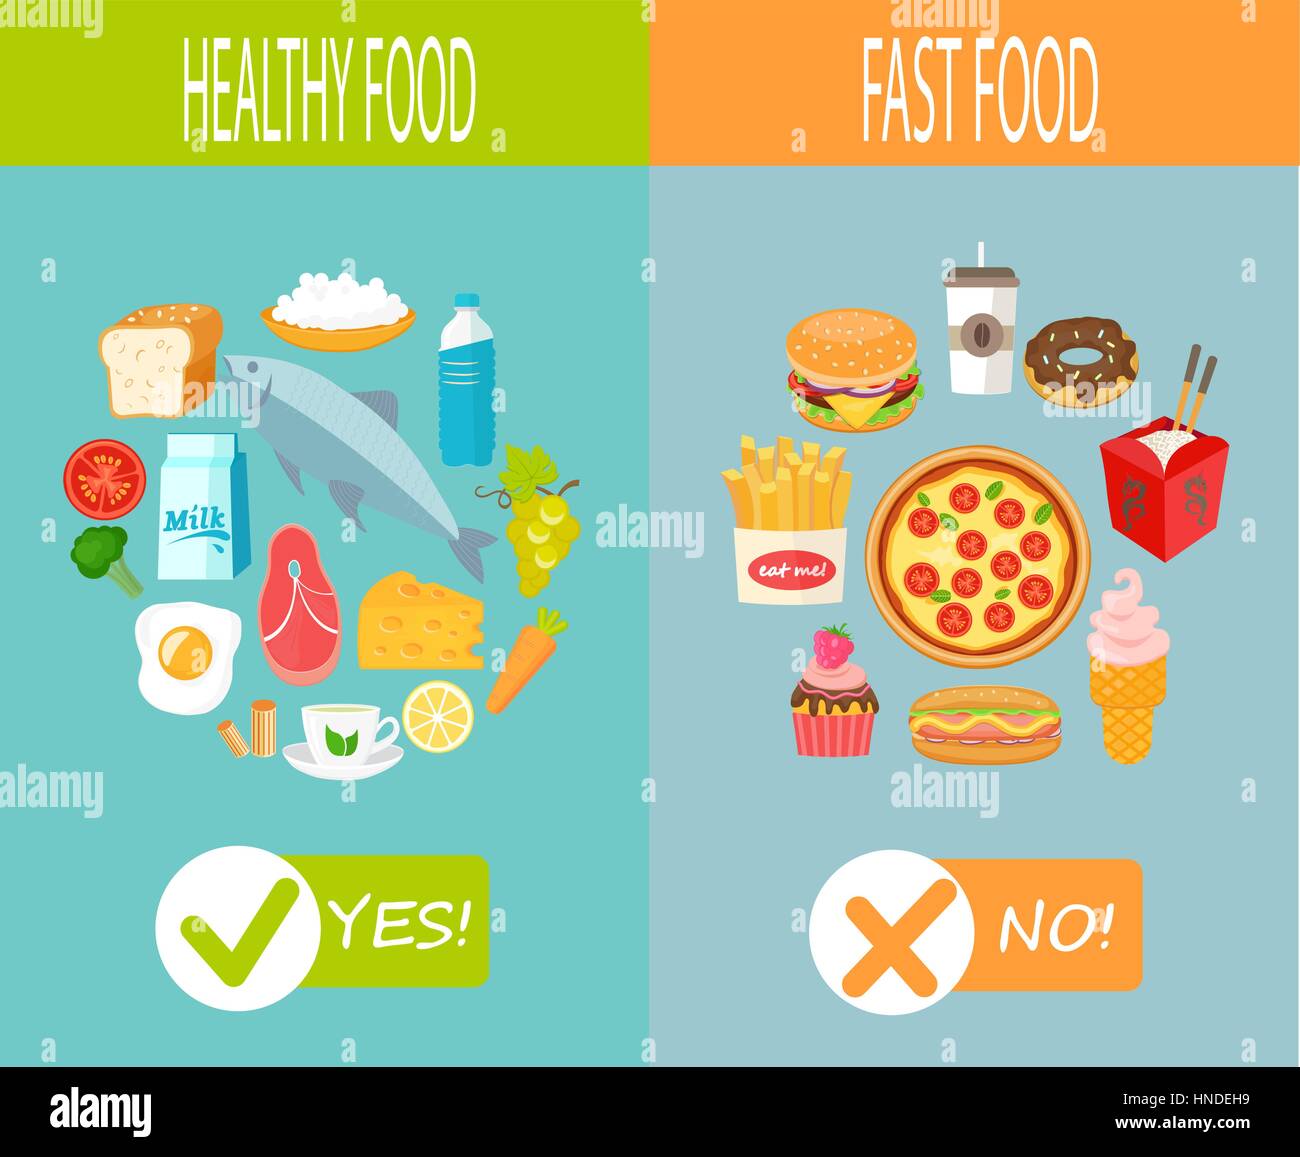 Healthy food and fast food, vector infographic. Stock Vector